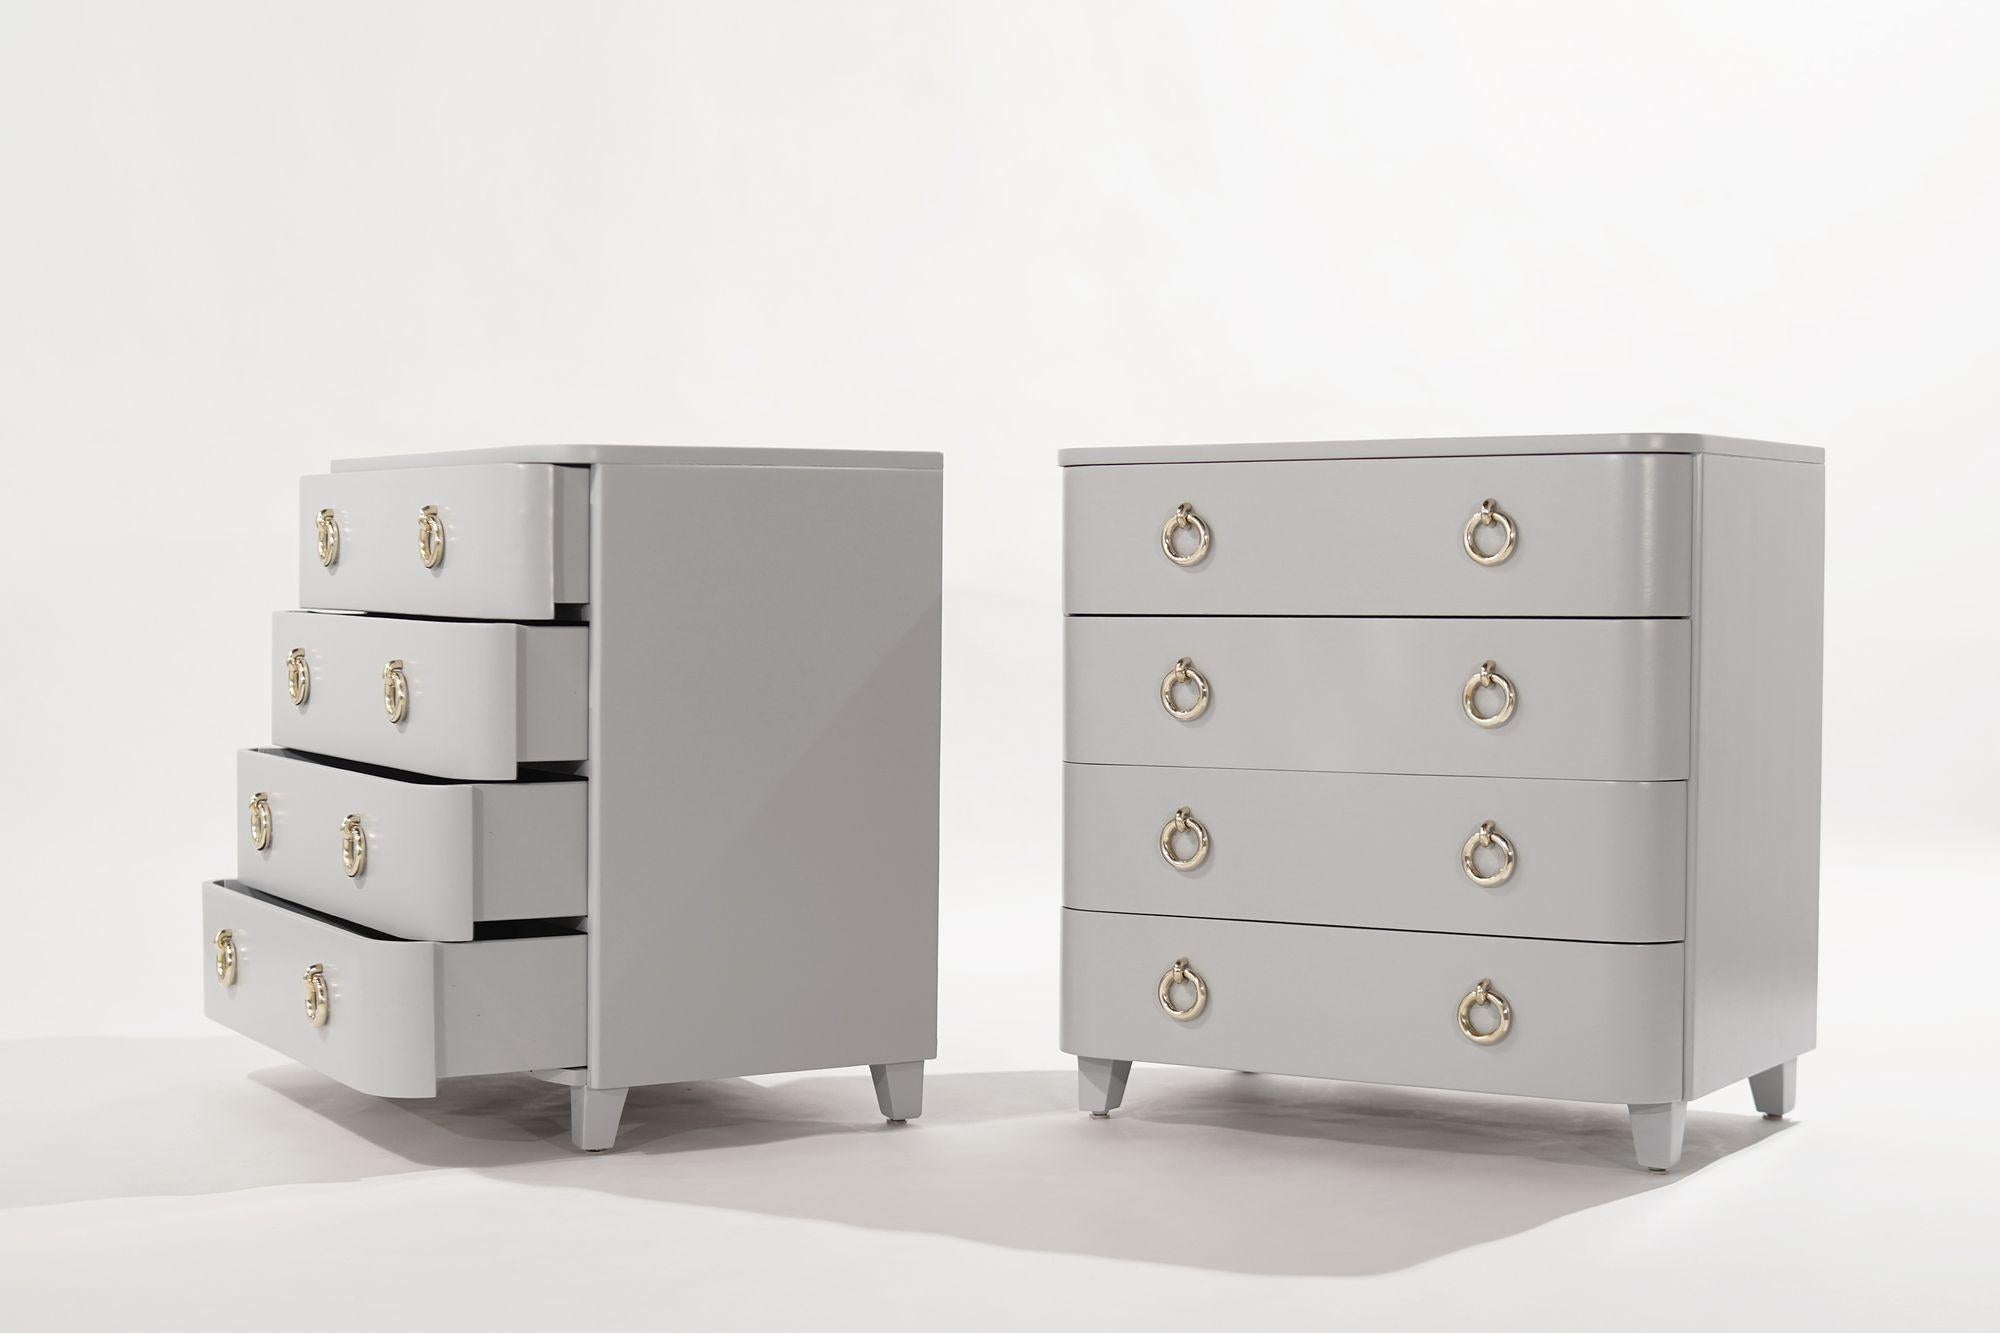 Set of Modernist Lacquered Bedside Tables, C. 1950s In Excellent Condition For Sale In Westport, CT